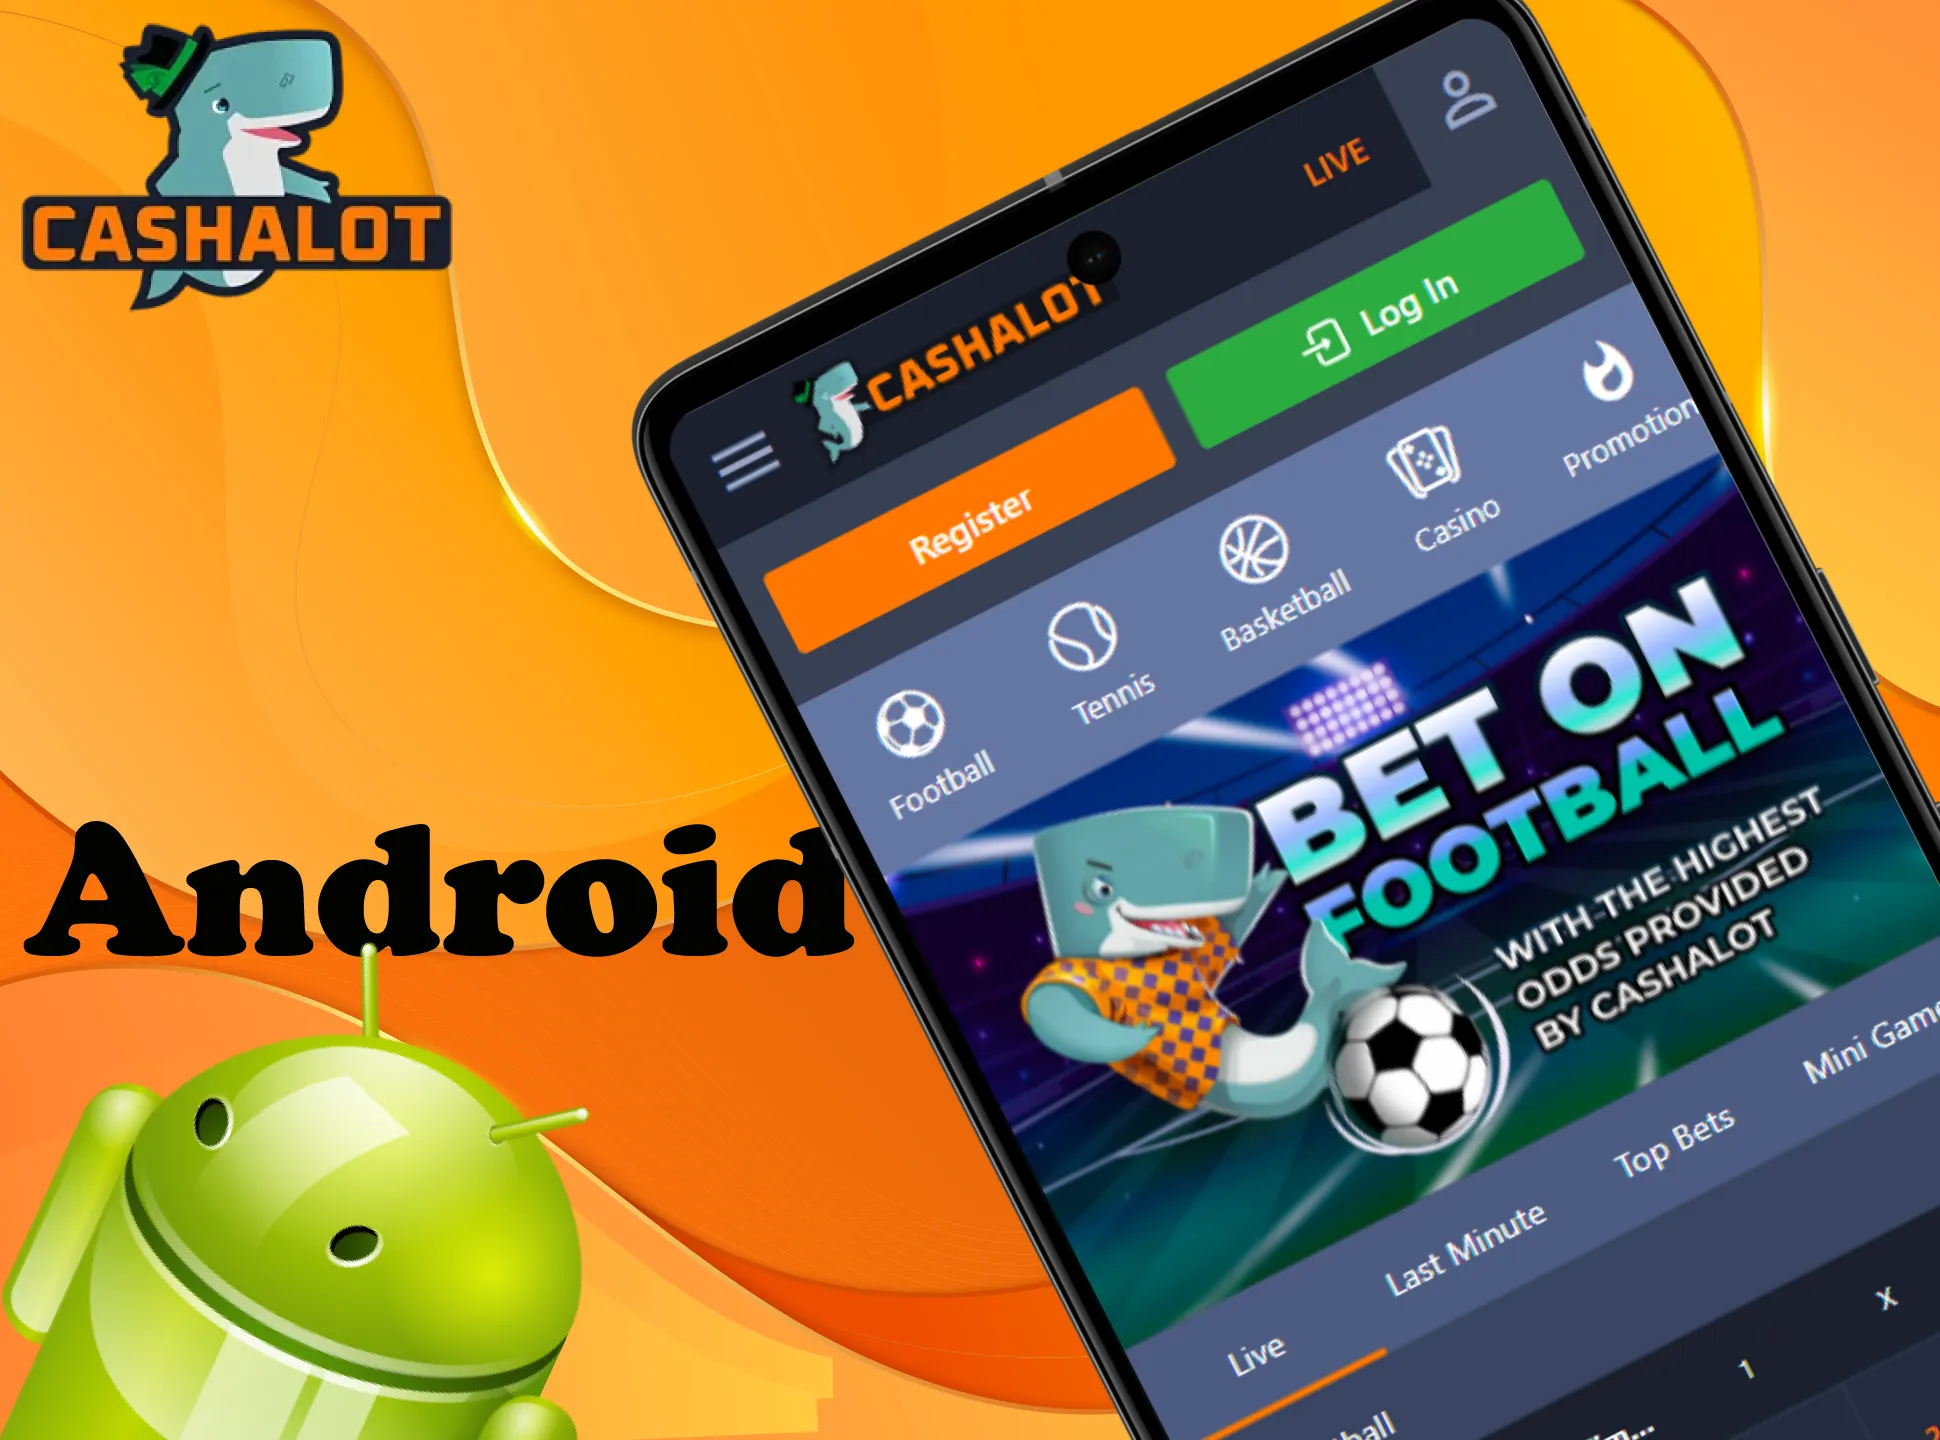 Install the Cashalot app on your Android device.